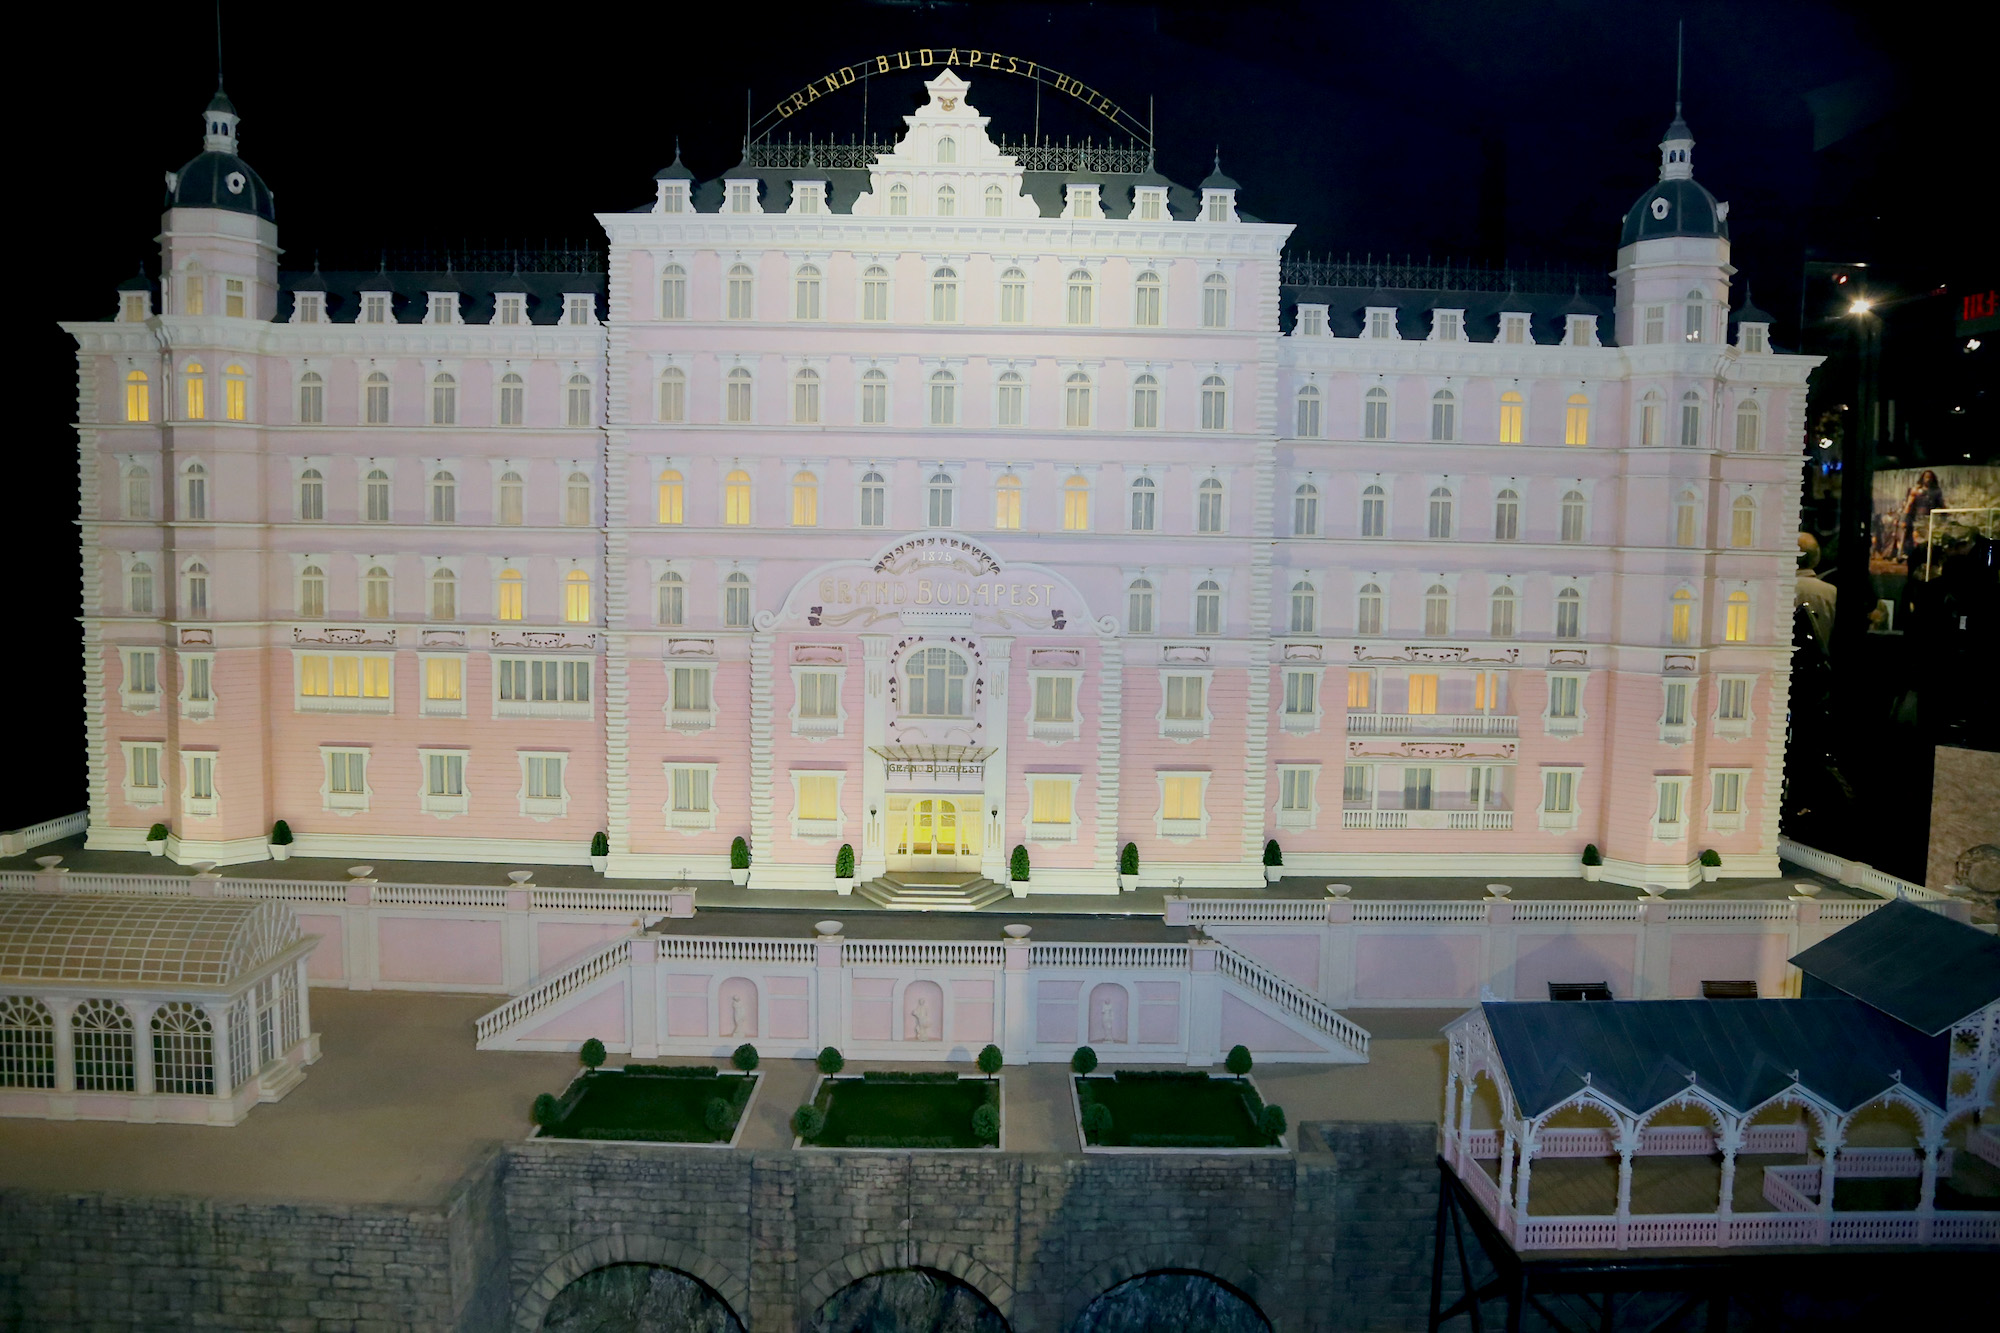 A model of 'The Grand Budapest Hotel'